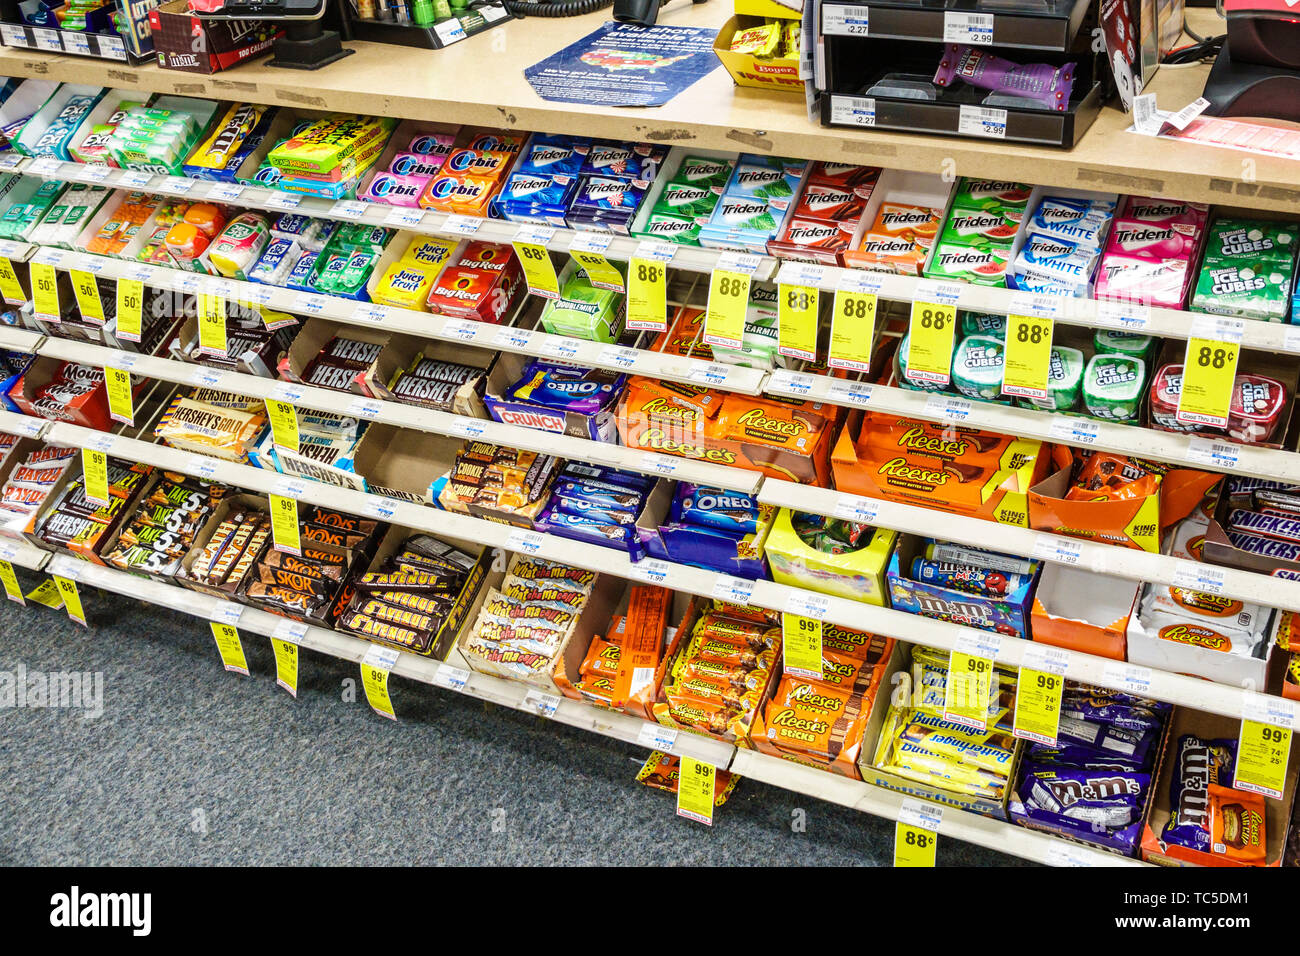 Miami Beach Florida,CVS Pharmacy drugstore,inside interior,product products display sale,candy bars chewing gum junk food,Trident Reese's m&m's Hershe Stock Photo